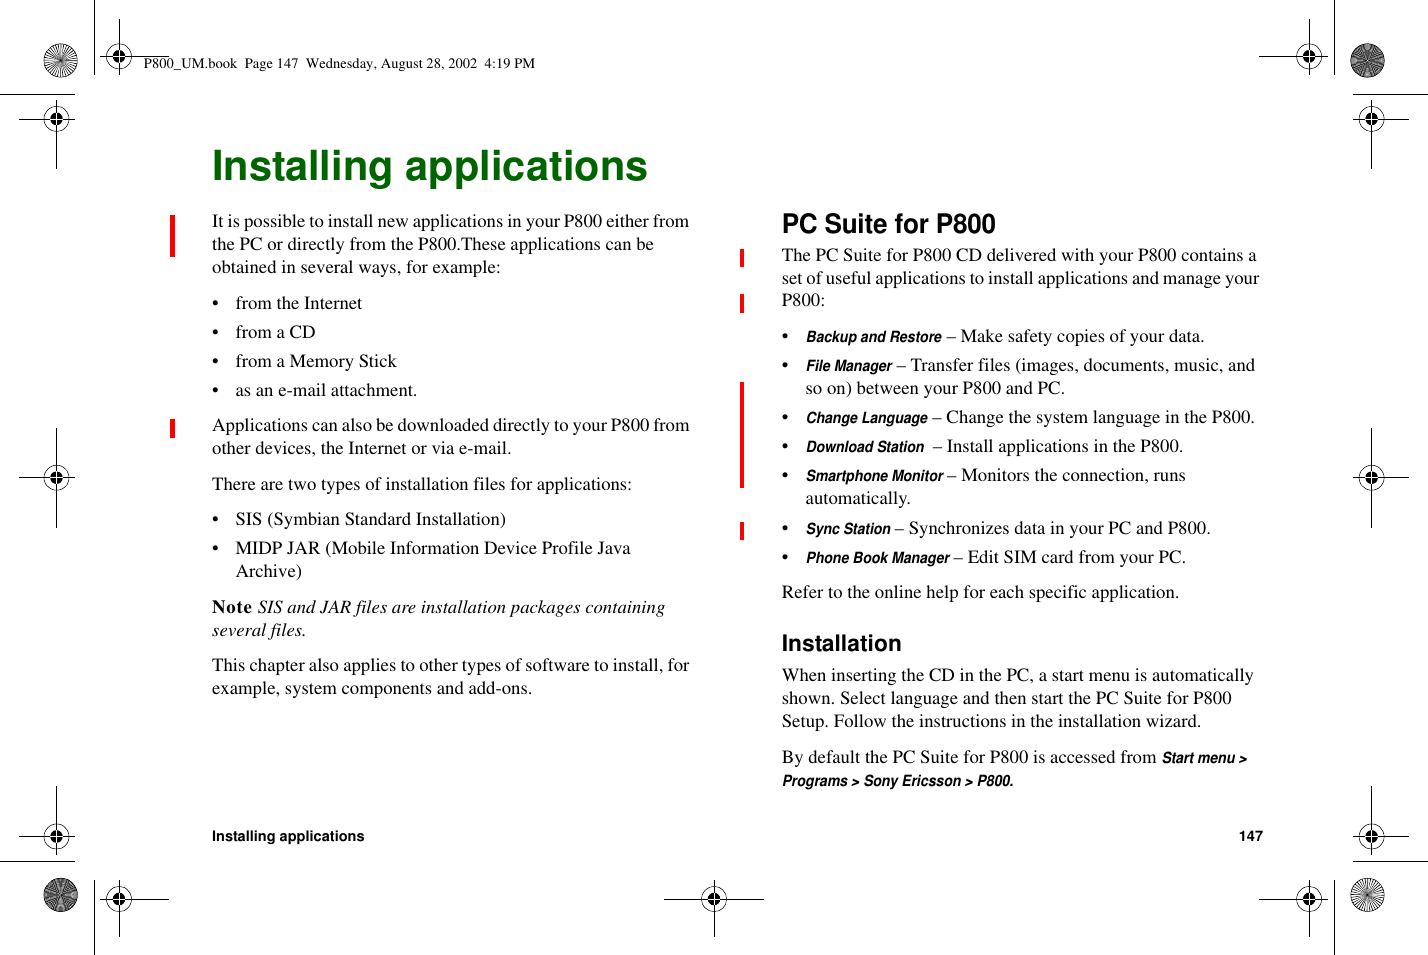 Installing applications 147Installing applicationsIt is possible to install new applications in your P800 either fromthe PC or directly from the P800.These applications can beobtained in several ways, for example:• from the Internet• from a CD• from a Memory Stick• as an e-mail attachment.Applications can also be downloaded directly to your P800 fromother devices, the Internet or via e-mail.There are two types of installation files for applications:• SIS (Symbian Standard Installation)• MIDP JAR (Mobile Information Device Profile JavaArchive)Note SIS and JAR files are installation packages containingseveral files.This chapter also applies to other types of software to install, forexample, system components and add-ons.PC Suite for P800The PC Suite for P800 CD delivered with your P800 contains aset of useful applications to install applications and manage yourP800:•Backup and Restore– Make safety copies of your data.•File Manager– Transfer files (images, documents, music, andso on) between your P800 and PC.•Change Language– Change the system language in the P800.•Download Station– Install applications in the P800.•Smartphone Monitor– Monitors the connection, runsautomatically.•Sync Station– Synchronizes data in your PC and P800.•Phone Book Manager– Edit SIM card from your PC.Refer to the online help for each specific application.InstallationWhen inserting the CD in the PC, a start menu is automaticallyshown. Select language and then start the PC Suite for P800Setup. Follow the instructions in the installation wizard.By default the PC Suite for P800 is accessed fromStart menu &gt;Programs &gt; Sony Ericsson &gt; P800.P800_UM.book Page 147 Wednesday, August 28, 2002 4:19 PM